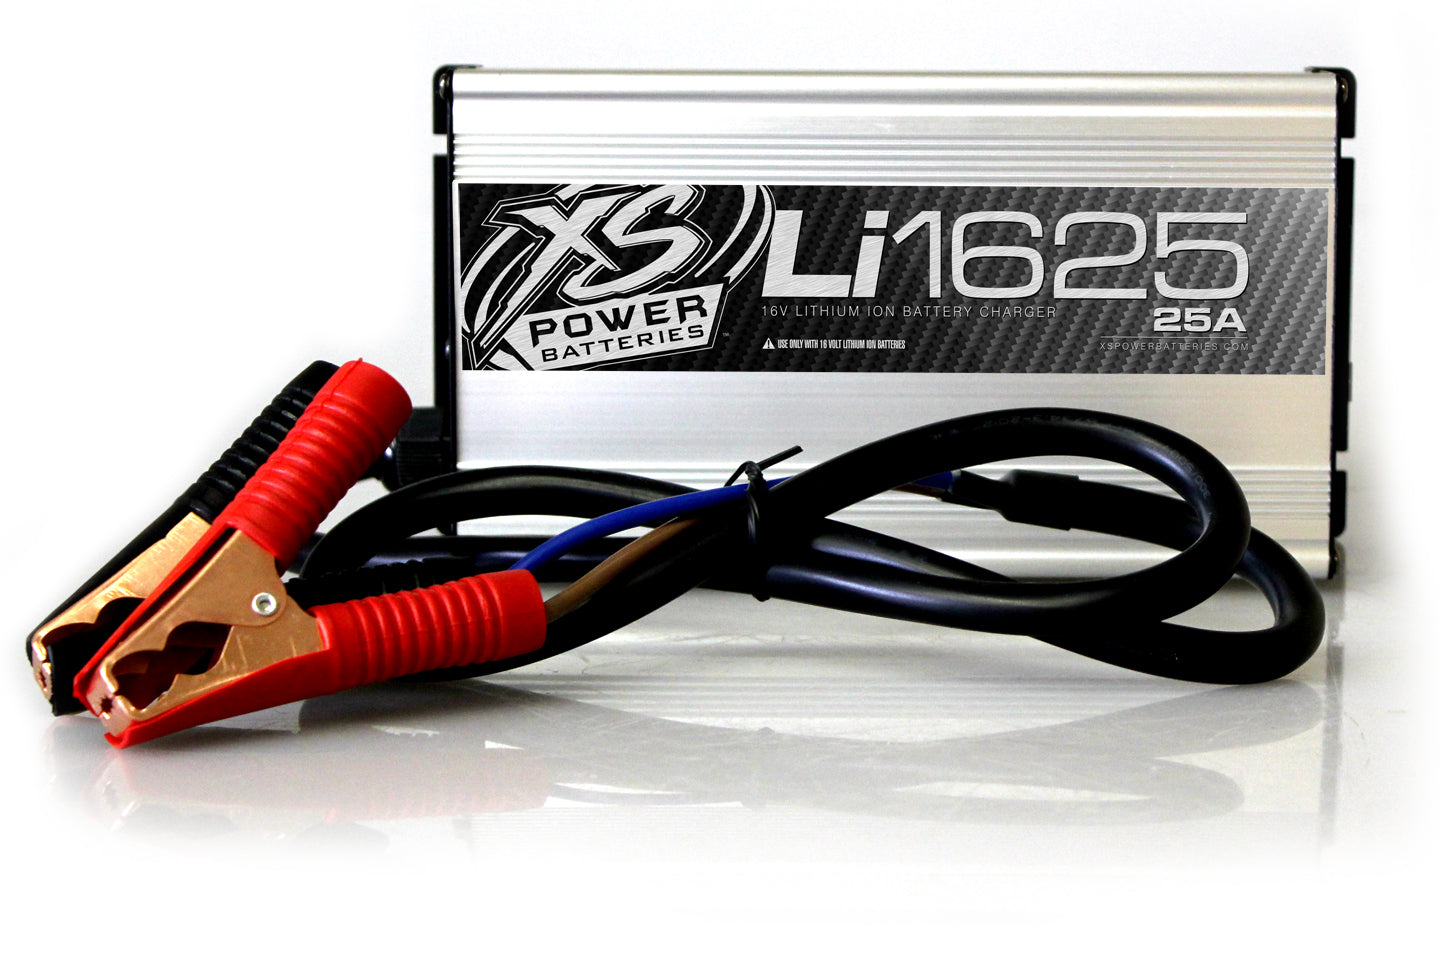 XS Power Li1625 16V Lithium Ion Battery Charger 25A